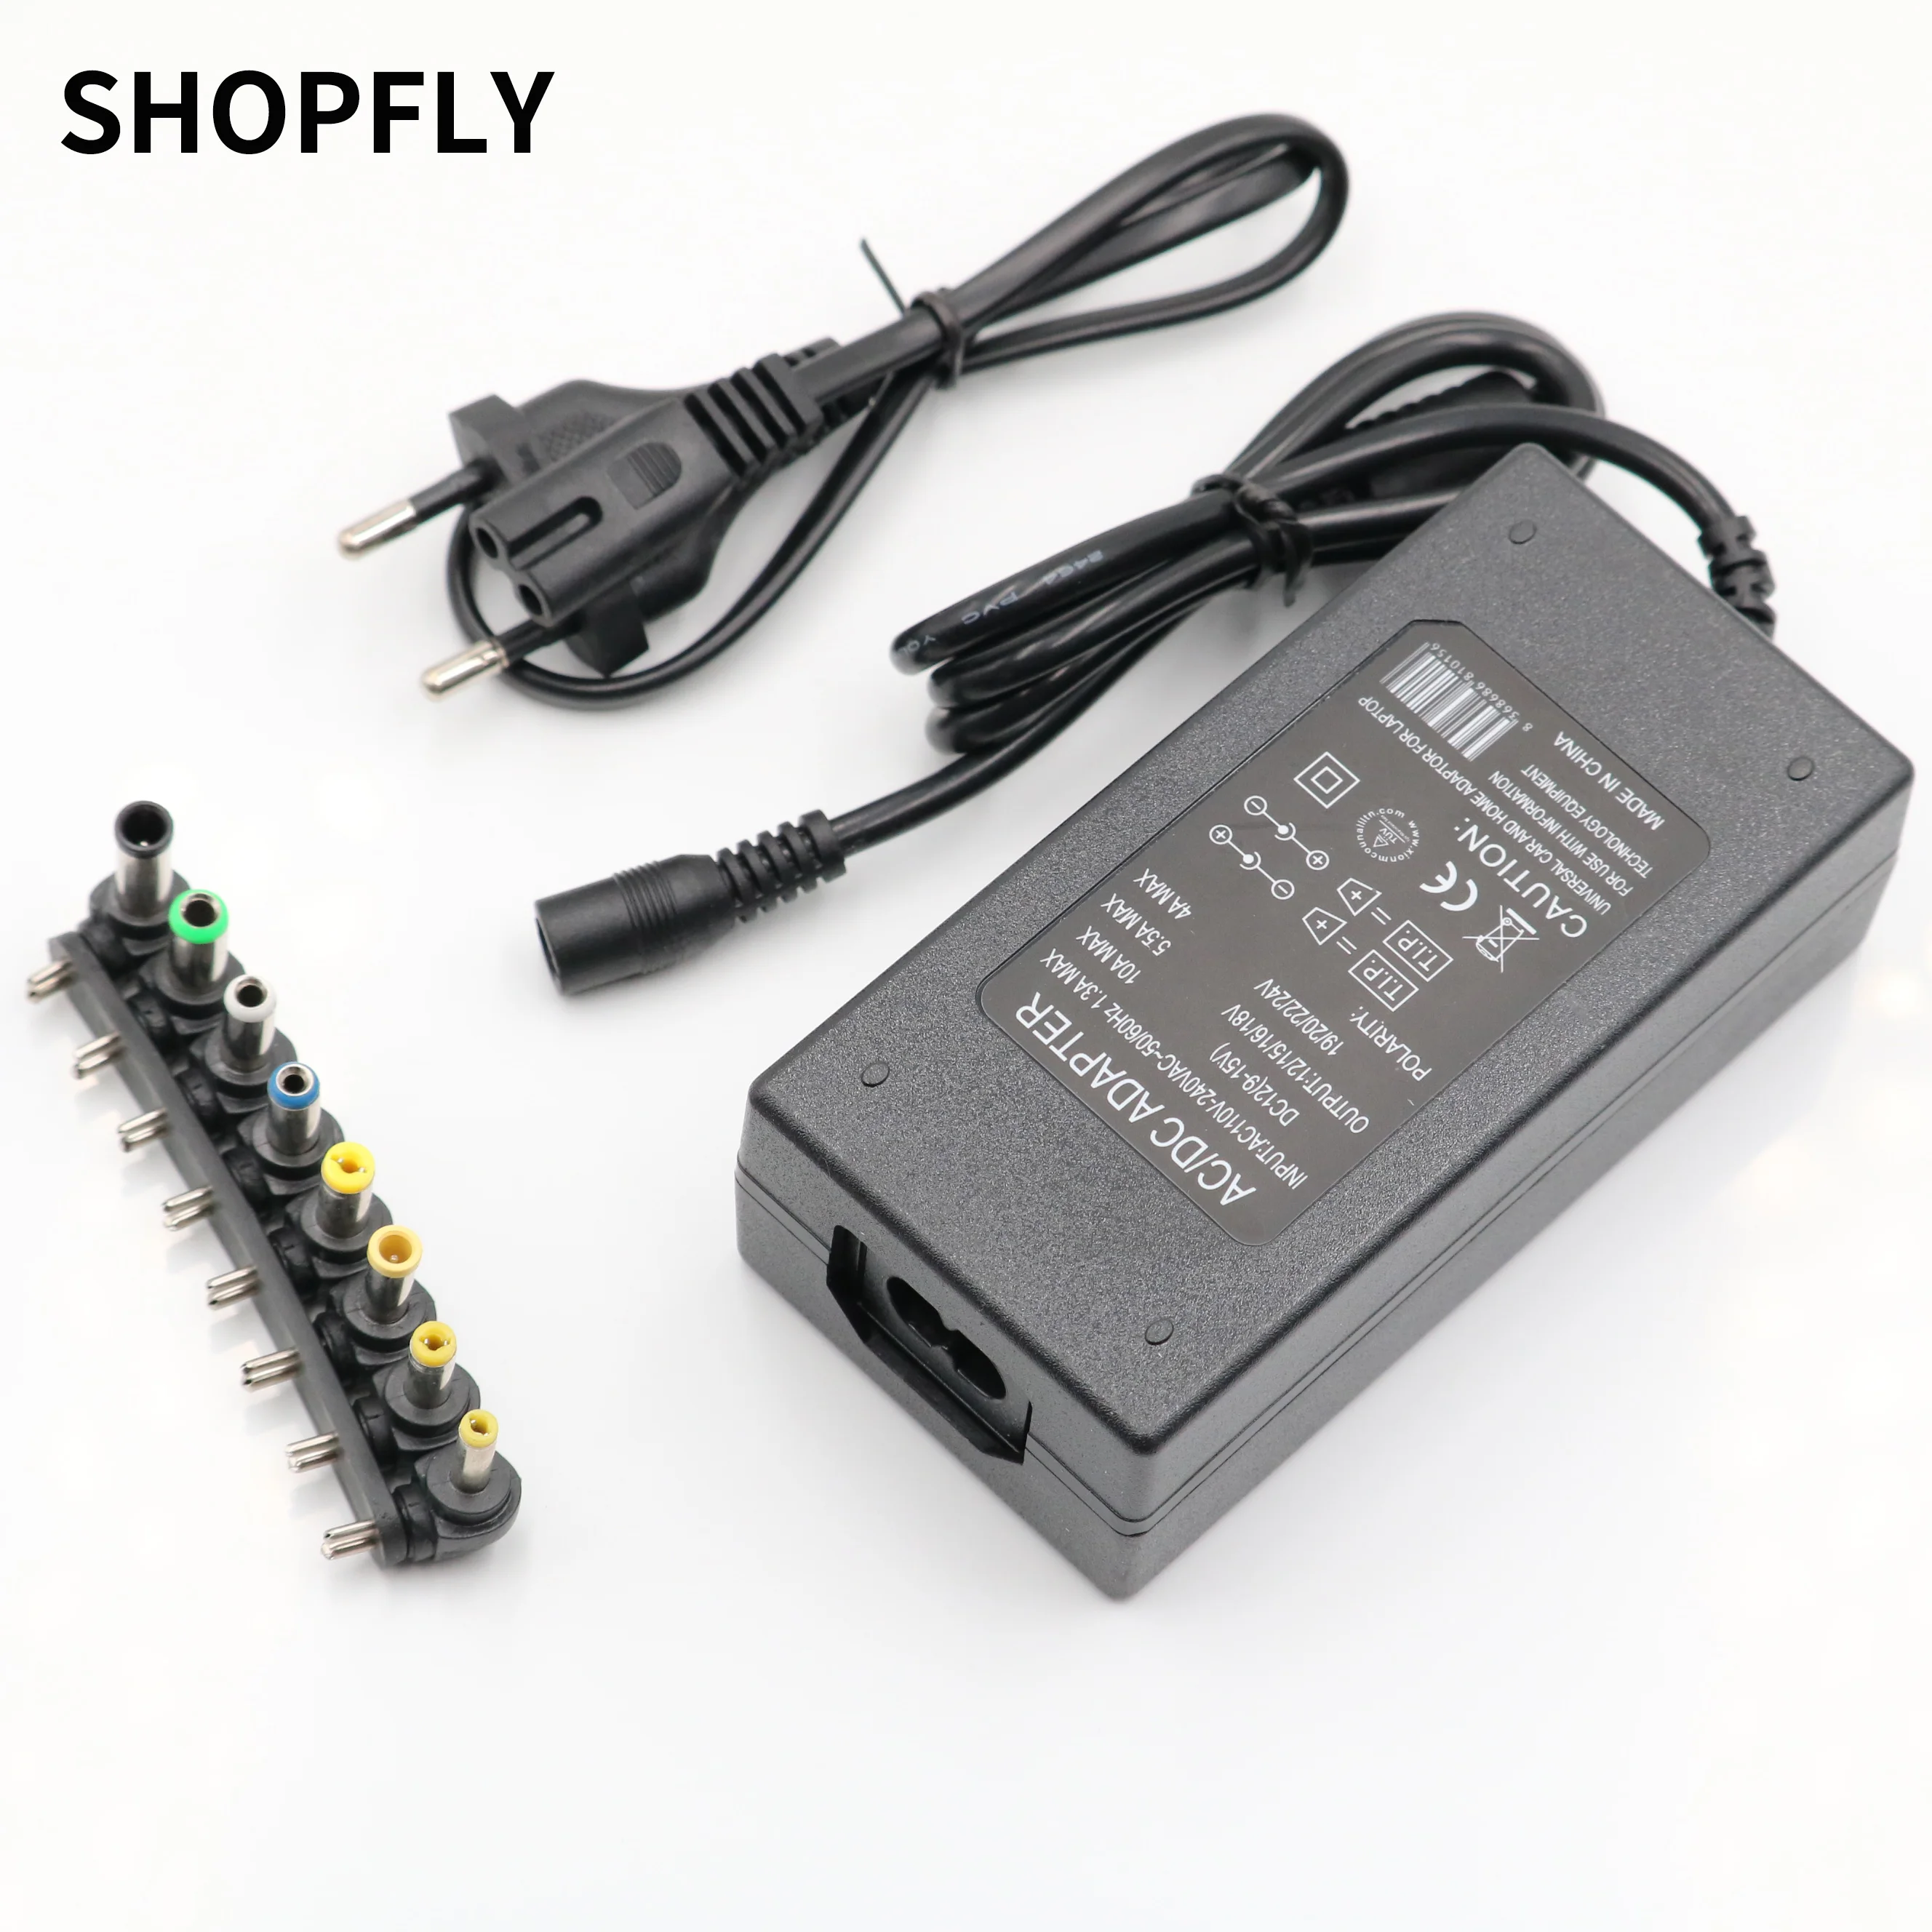 8 in 1 Universal Tool AC DC Power Charger Adapter for Laptop PC Notebook NEWLY 